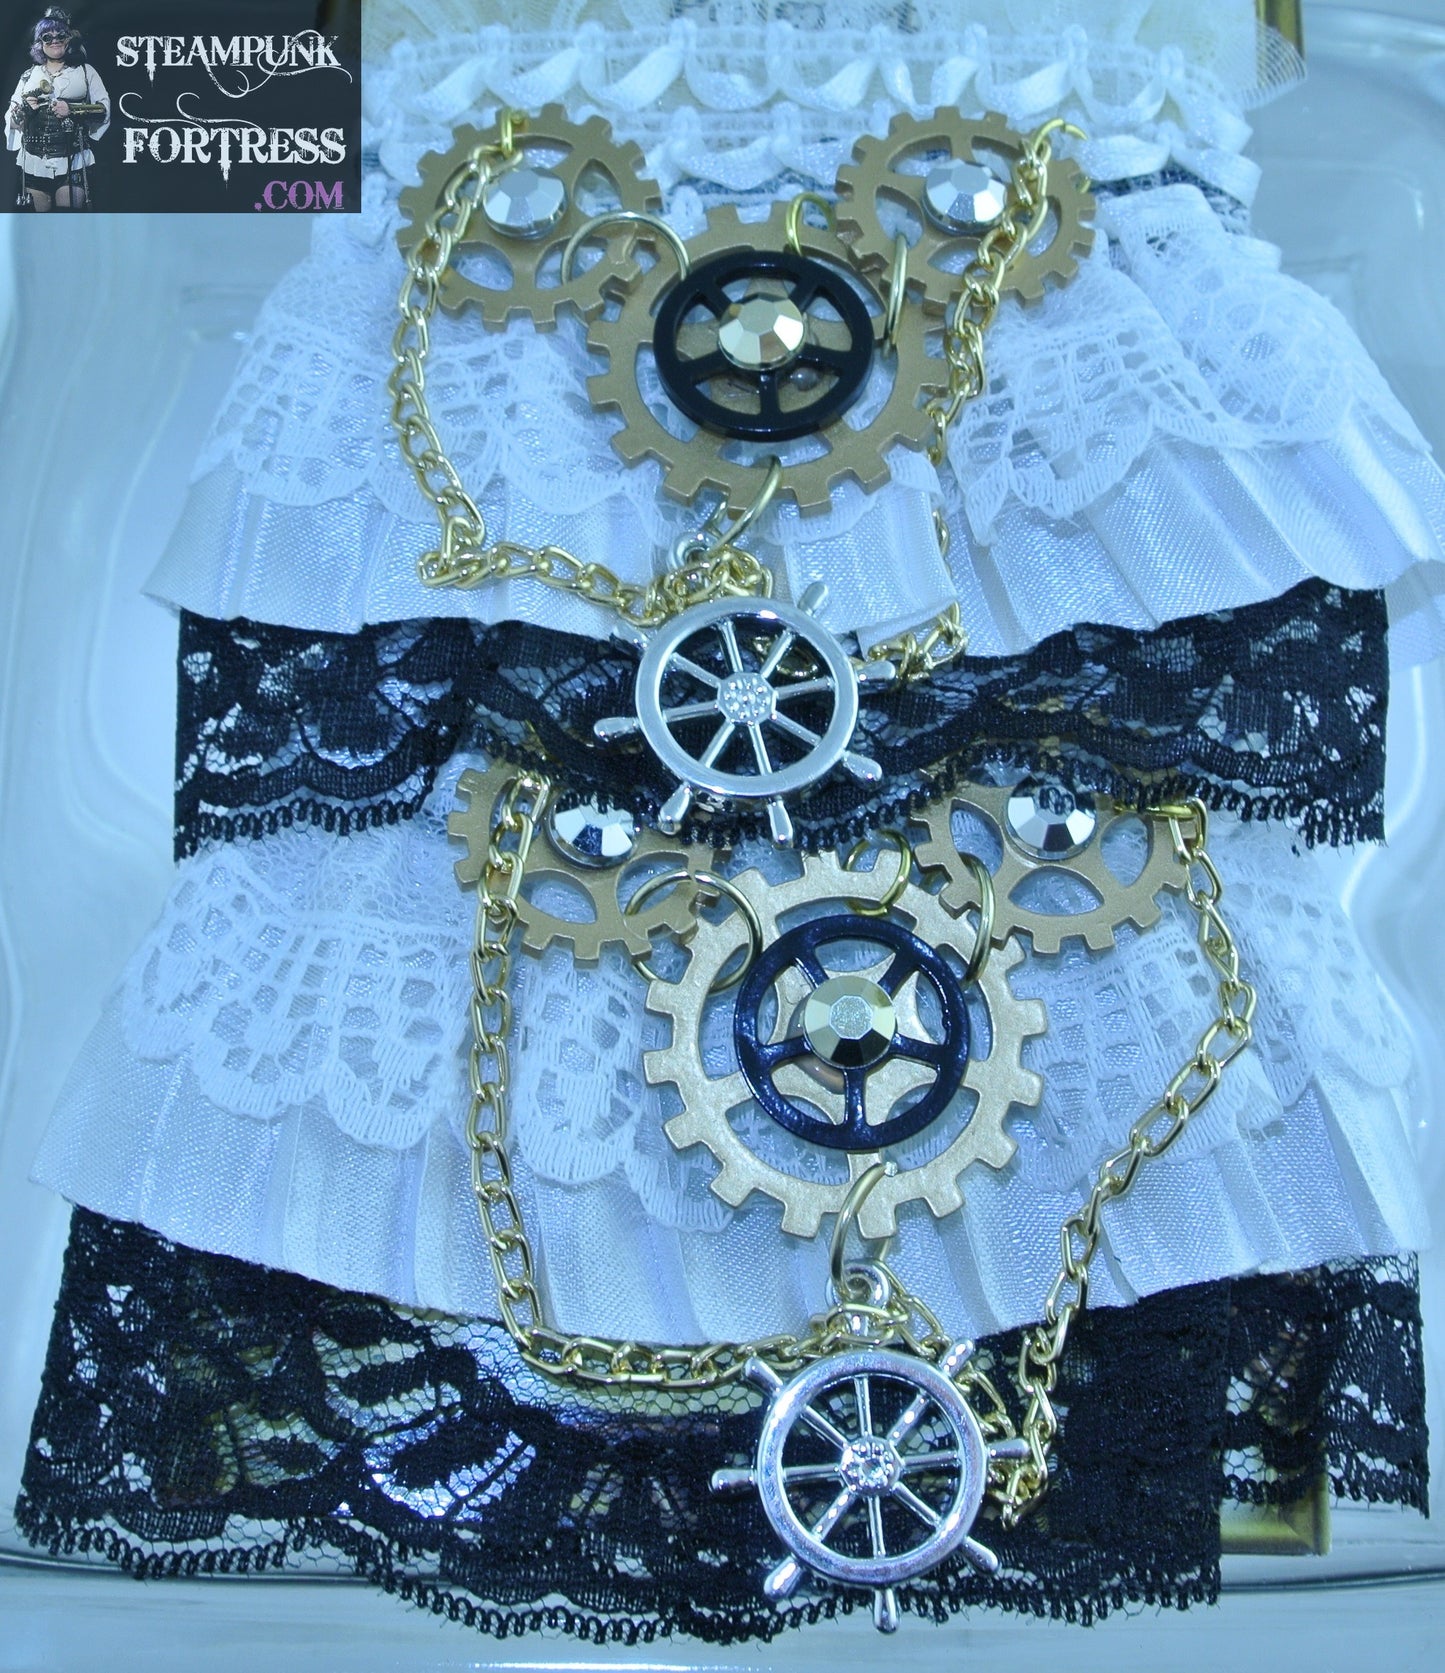 WHITE BLACK LACE WRIST LENGTH FINGERLESS GLOVES WRIST COVER GOLD GEARS SWAROVSKI CRYSTALS 80S COSPLAY COSTUME HALLOWEEN- MASS PRODUCED